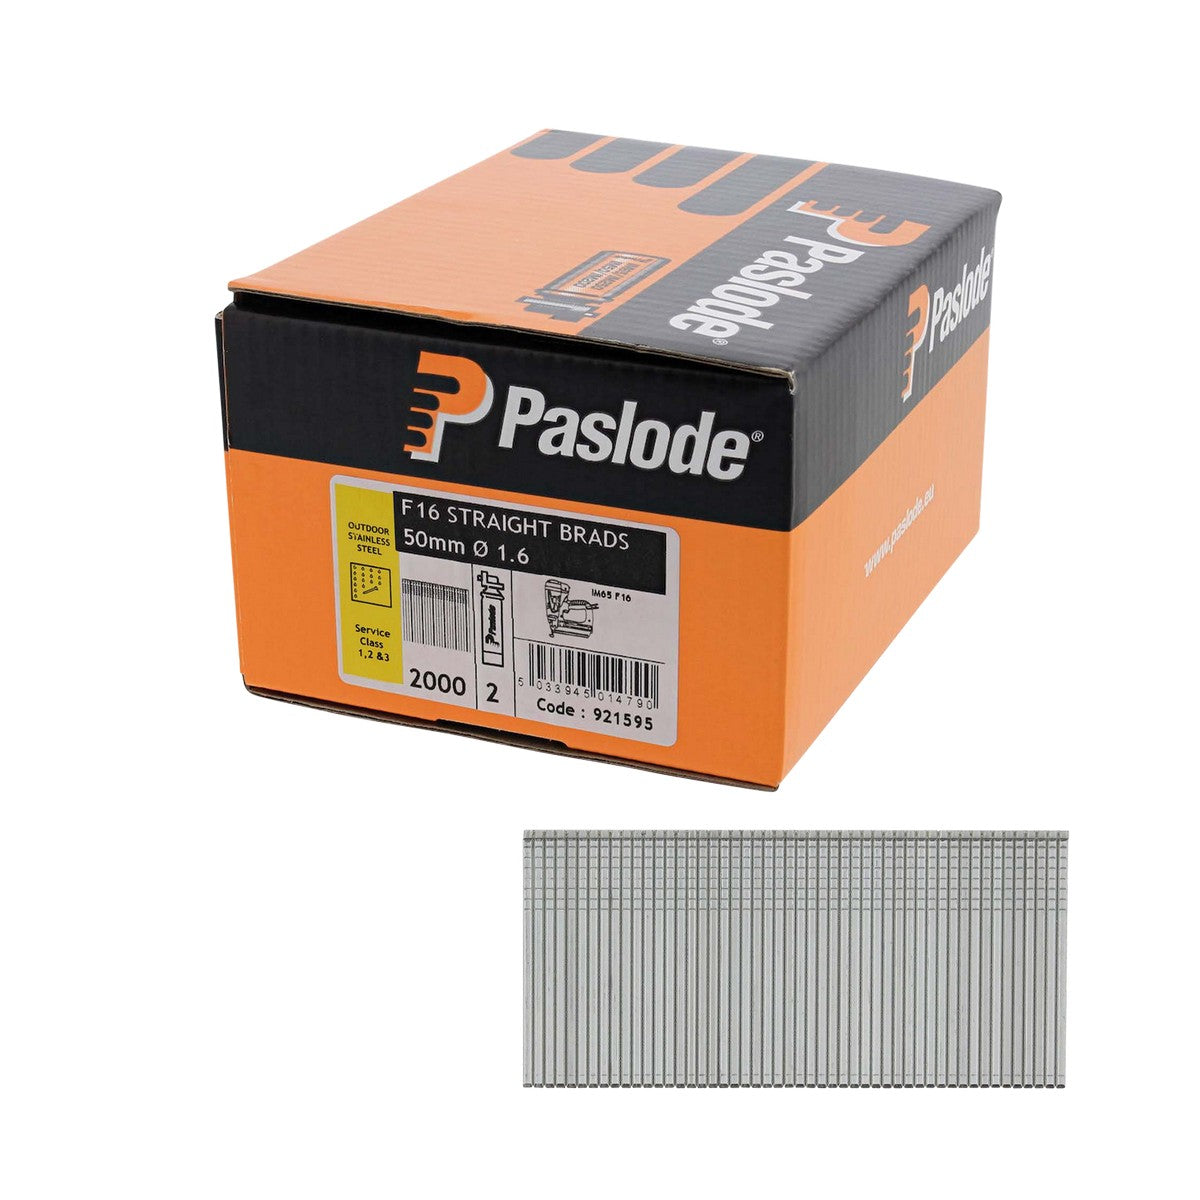 Paslode IM65 Stainless Steel Straight Brad Nails F16 - 50 mm